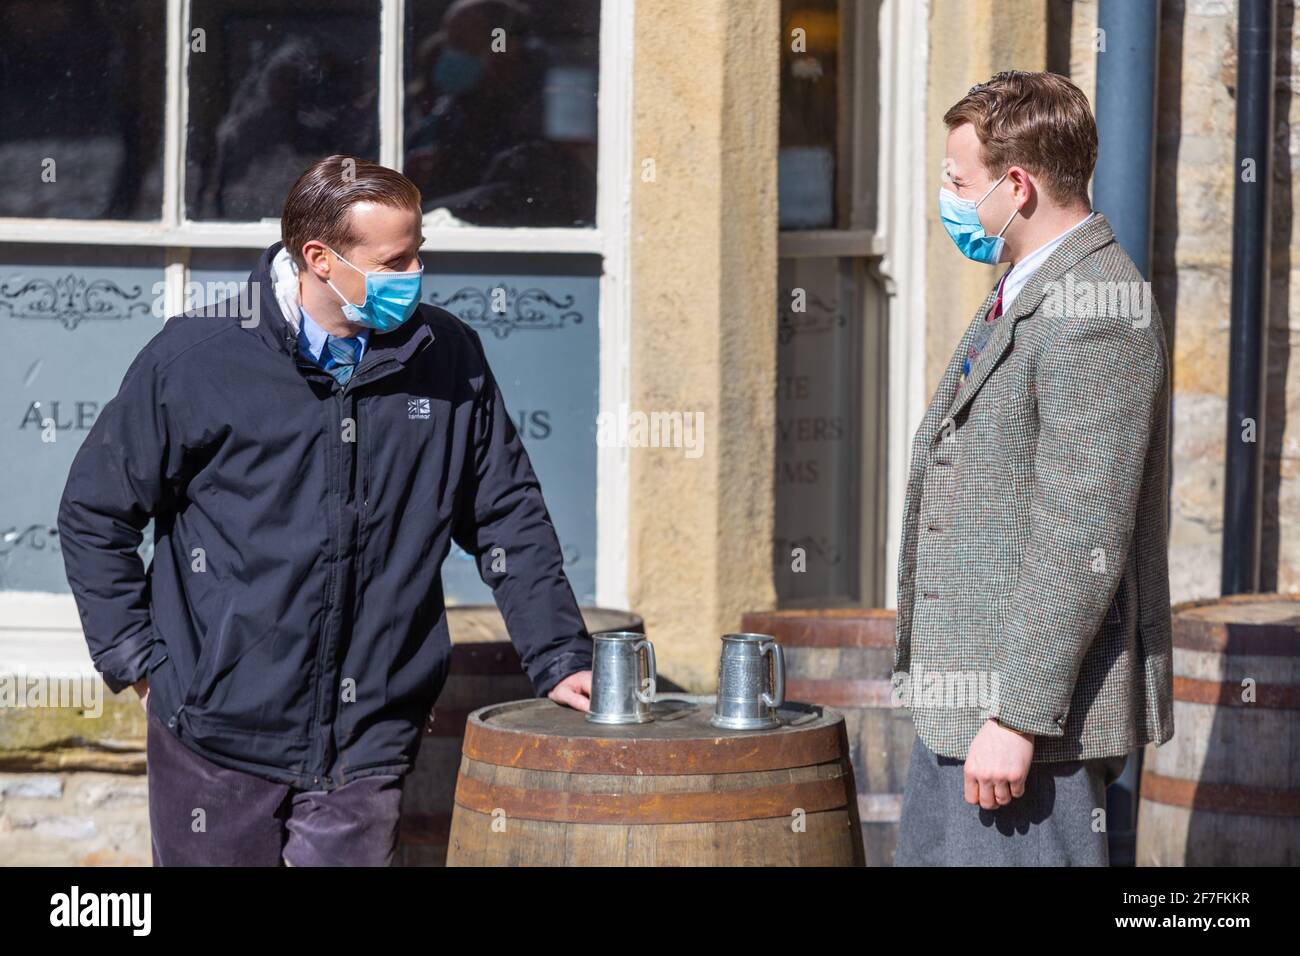 Grassington, UK. 7th April 2021. Nicholas Ralph (James Herriot) and Callum Woodhouse (Tristan Farnon) rehearse a scene wearing masks during filming for the second series of the Channel 5 re-make of All Creatures Great and Small takes place in village of Grassington in the Yorkshire Dales Nation Park. (Credit: Tom Holmes Photography / Alamy Live News) Stock Photo